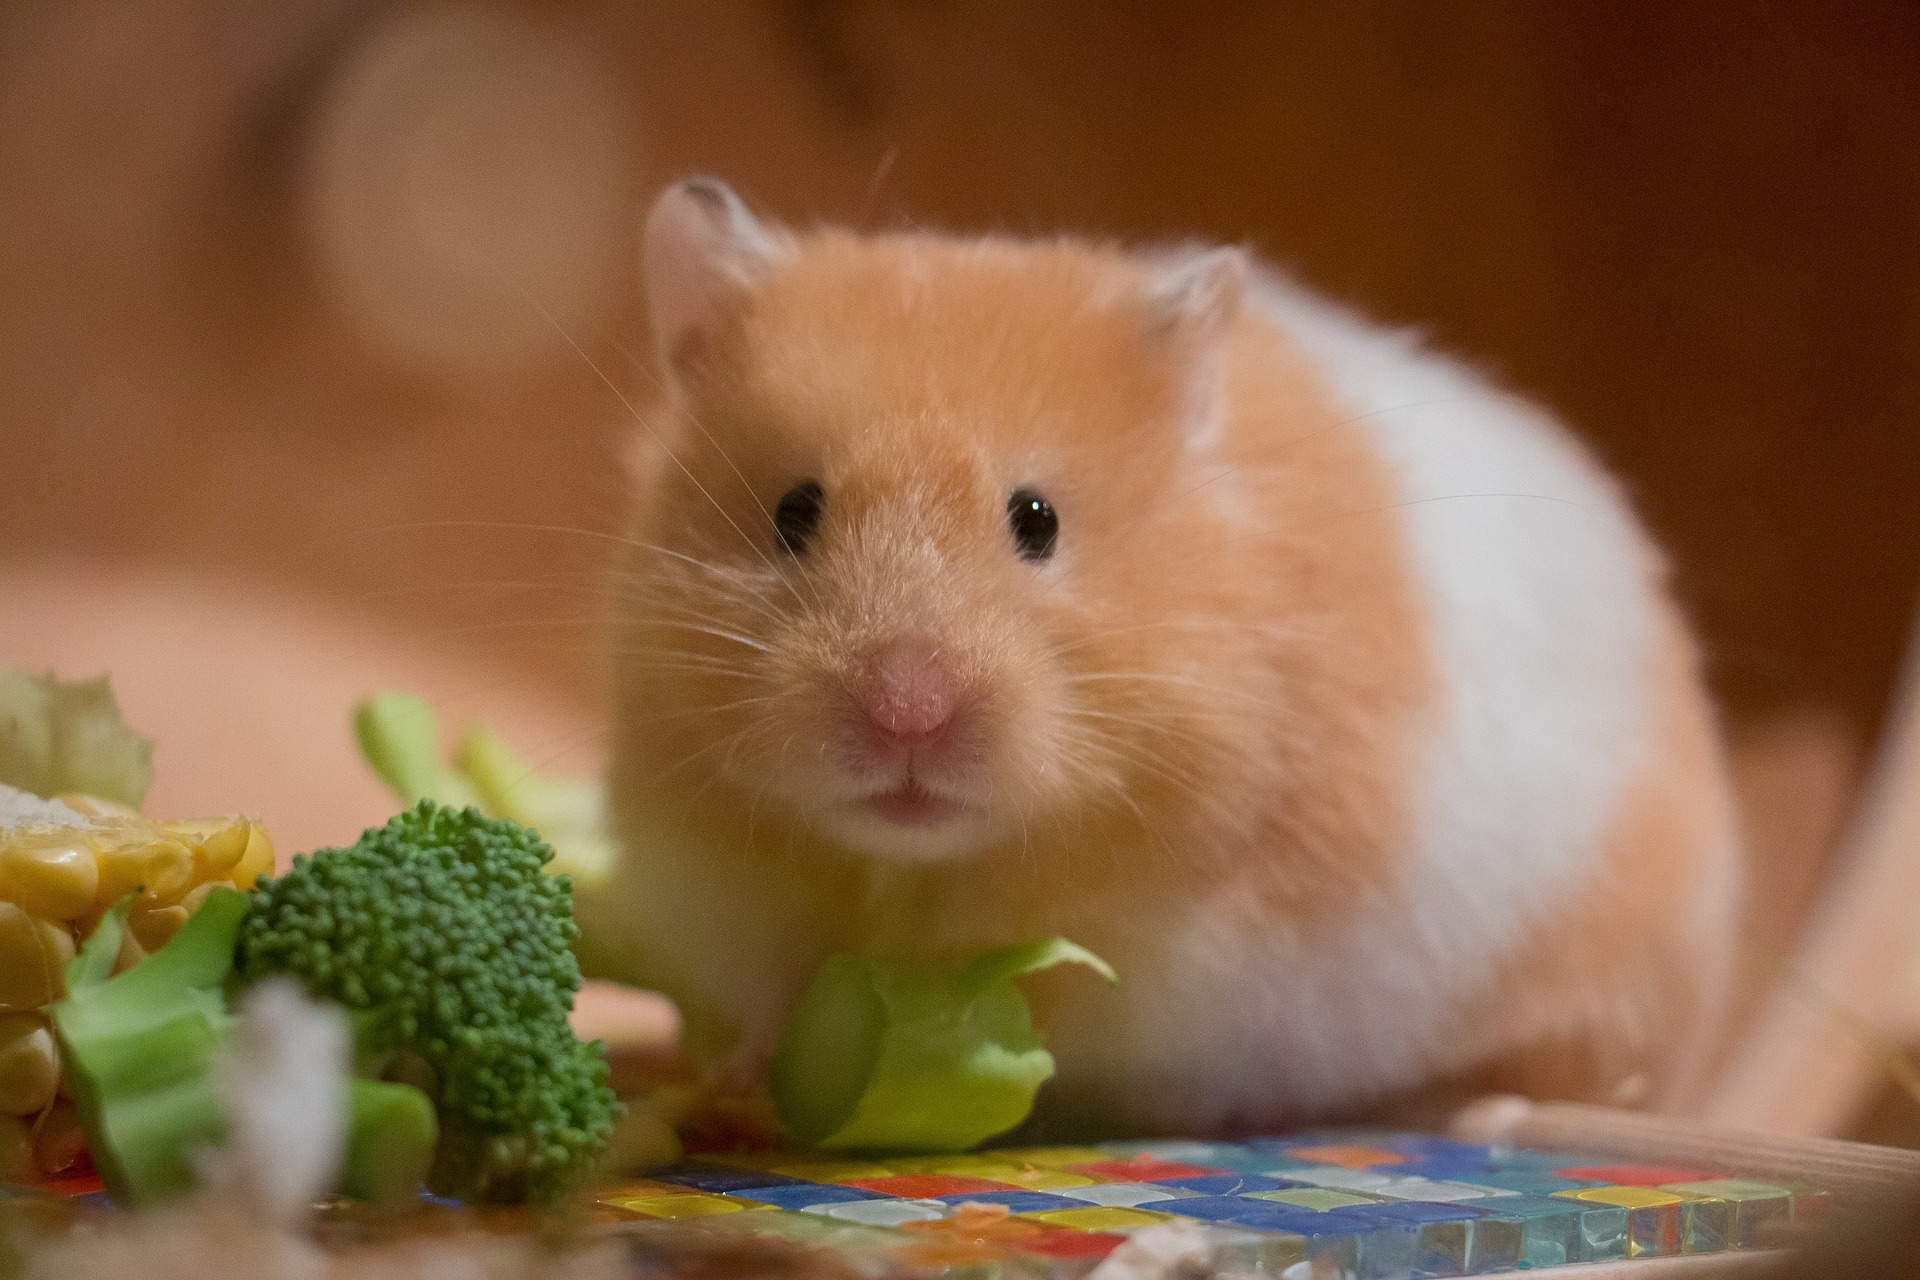 Signs of Illness and Disease in Pet Hamsters